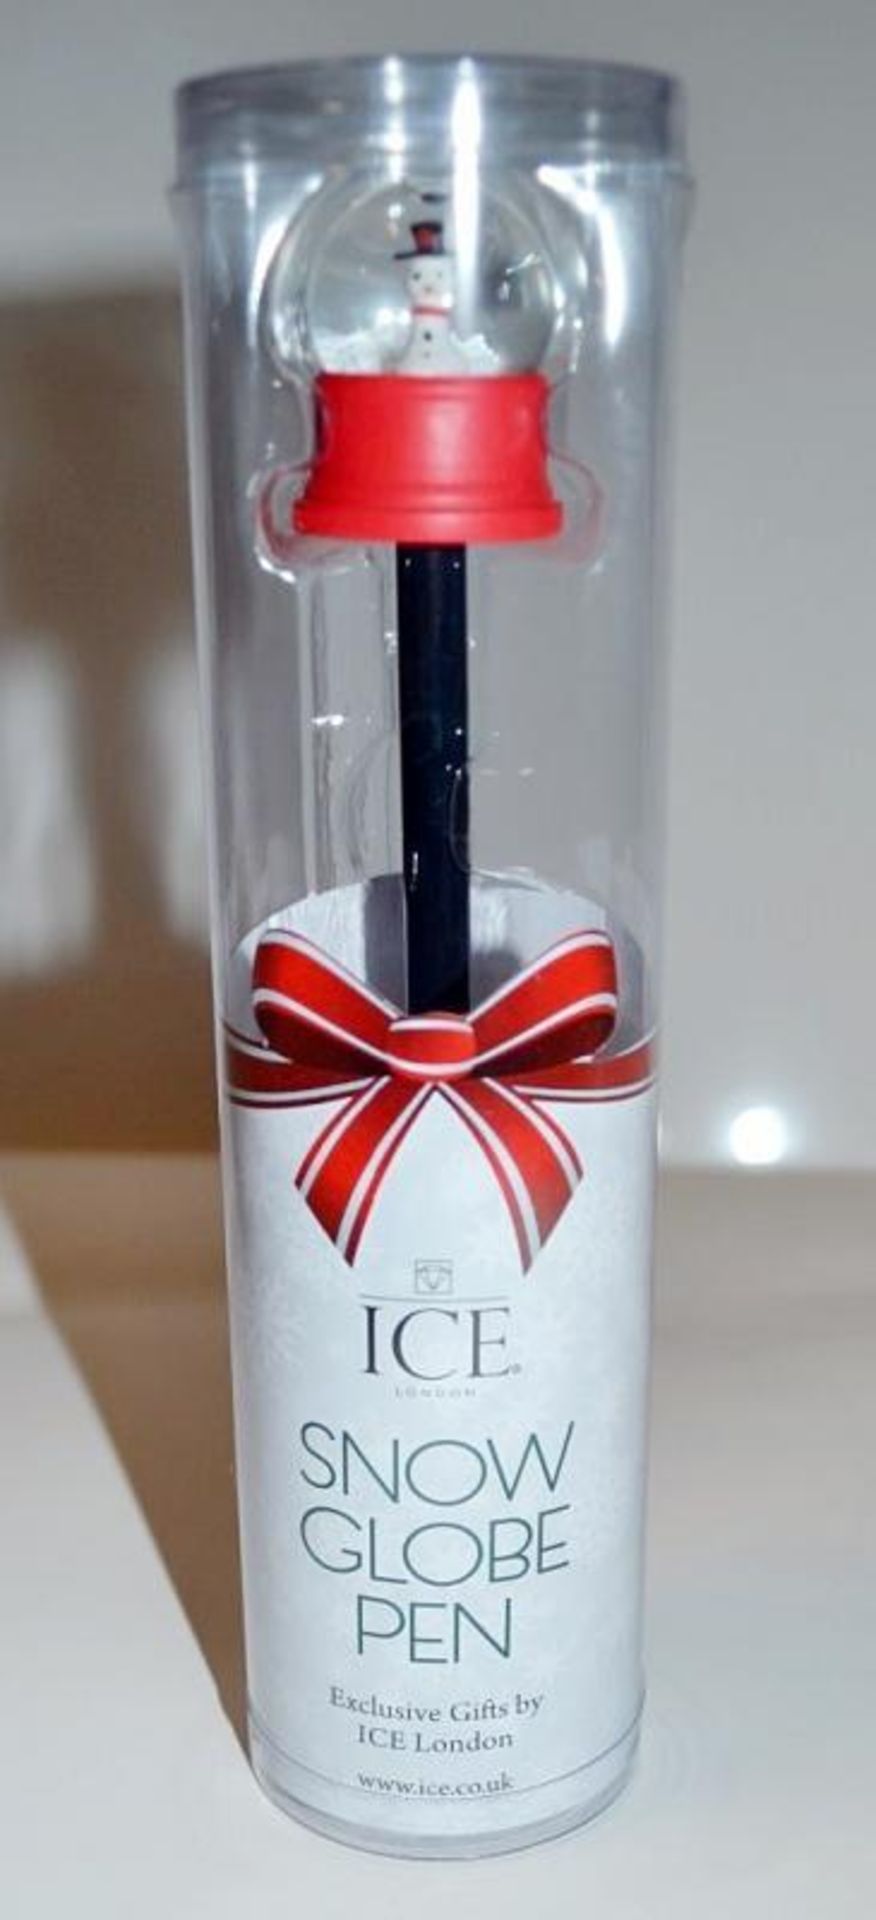 60 x ICE London Christmas Snow Globe Pen - Brand New Stock - Ideal Stocking Fillers - Ref: ICE101001 - Image 5 of 6